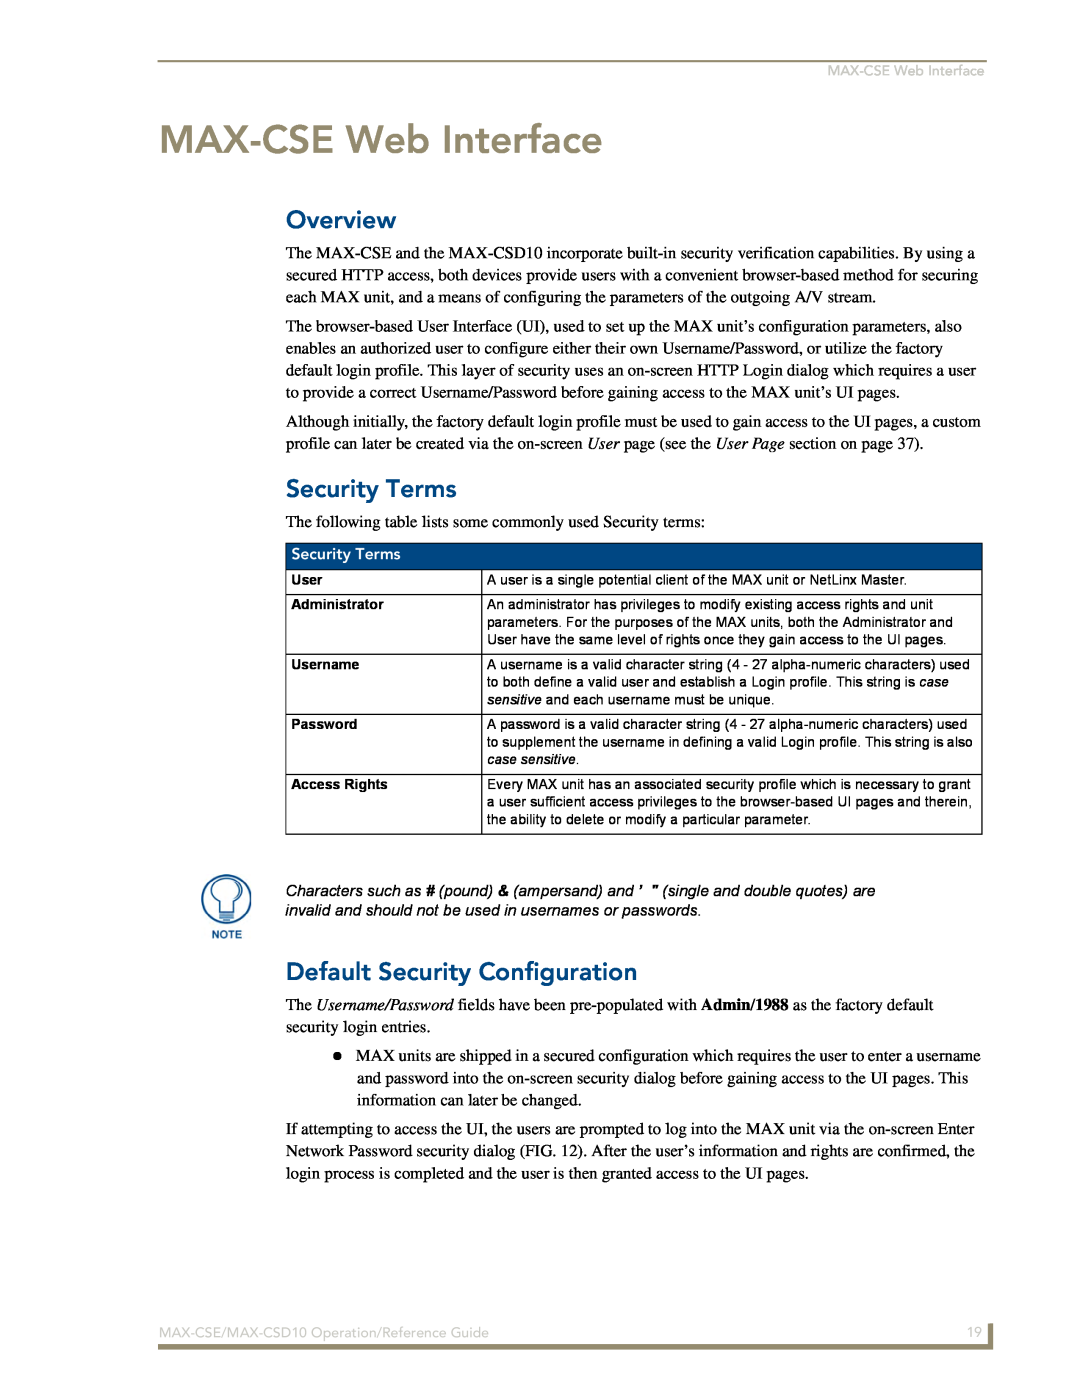 AMX MAX-CSD 10 manual MAX-CSEWeb Interface, Security Terms, Default Security Configuration, Overview 